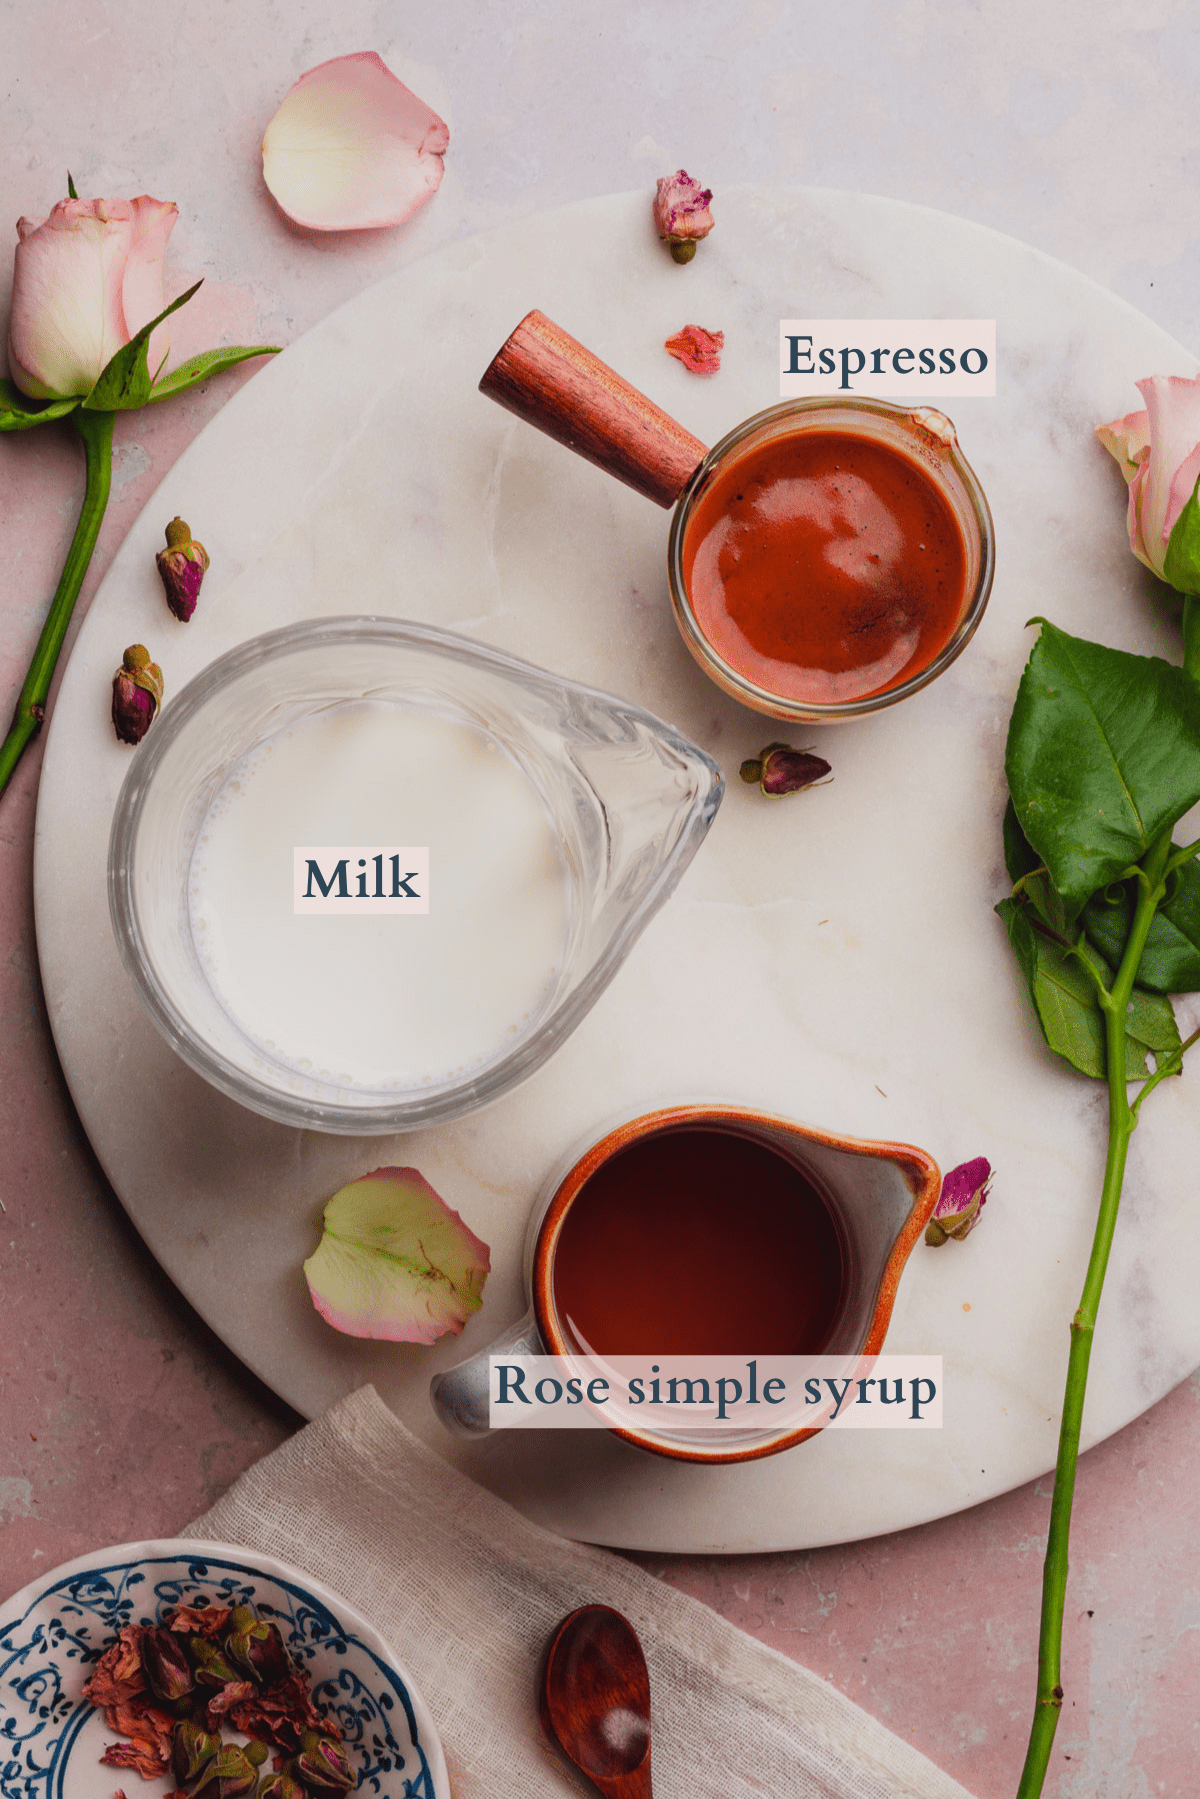 rose latte ingredients graphic with milk, espresso, rose simple syrup and edible rose petals, and text to denote the ingredients.